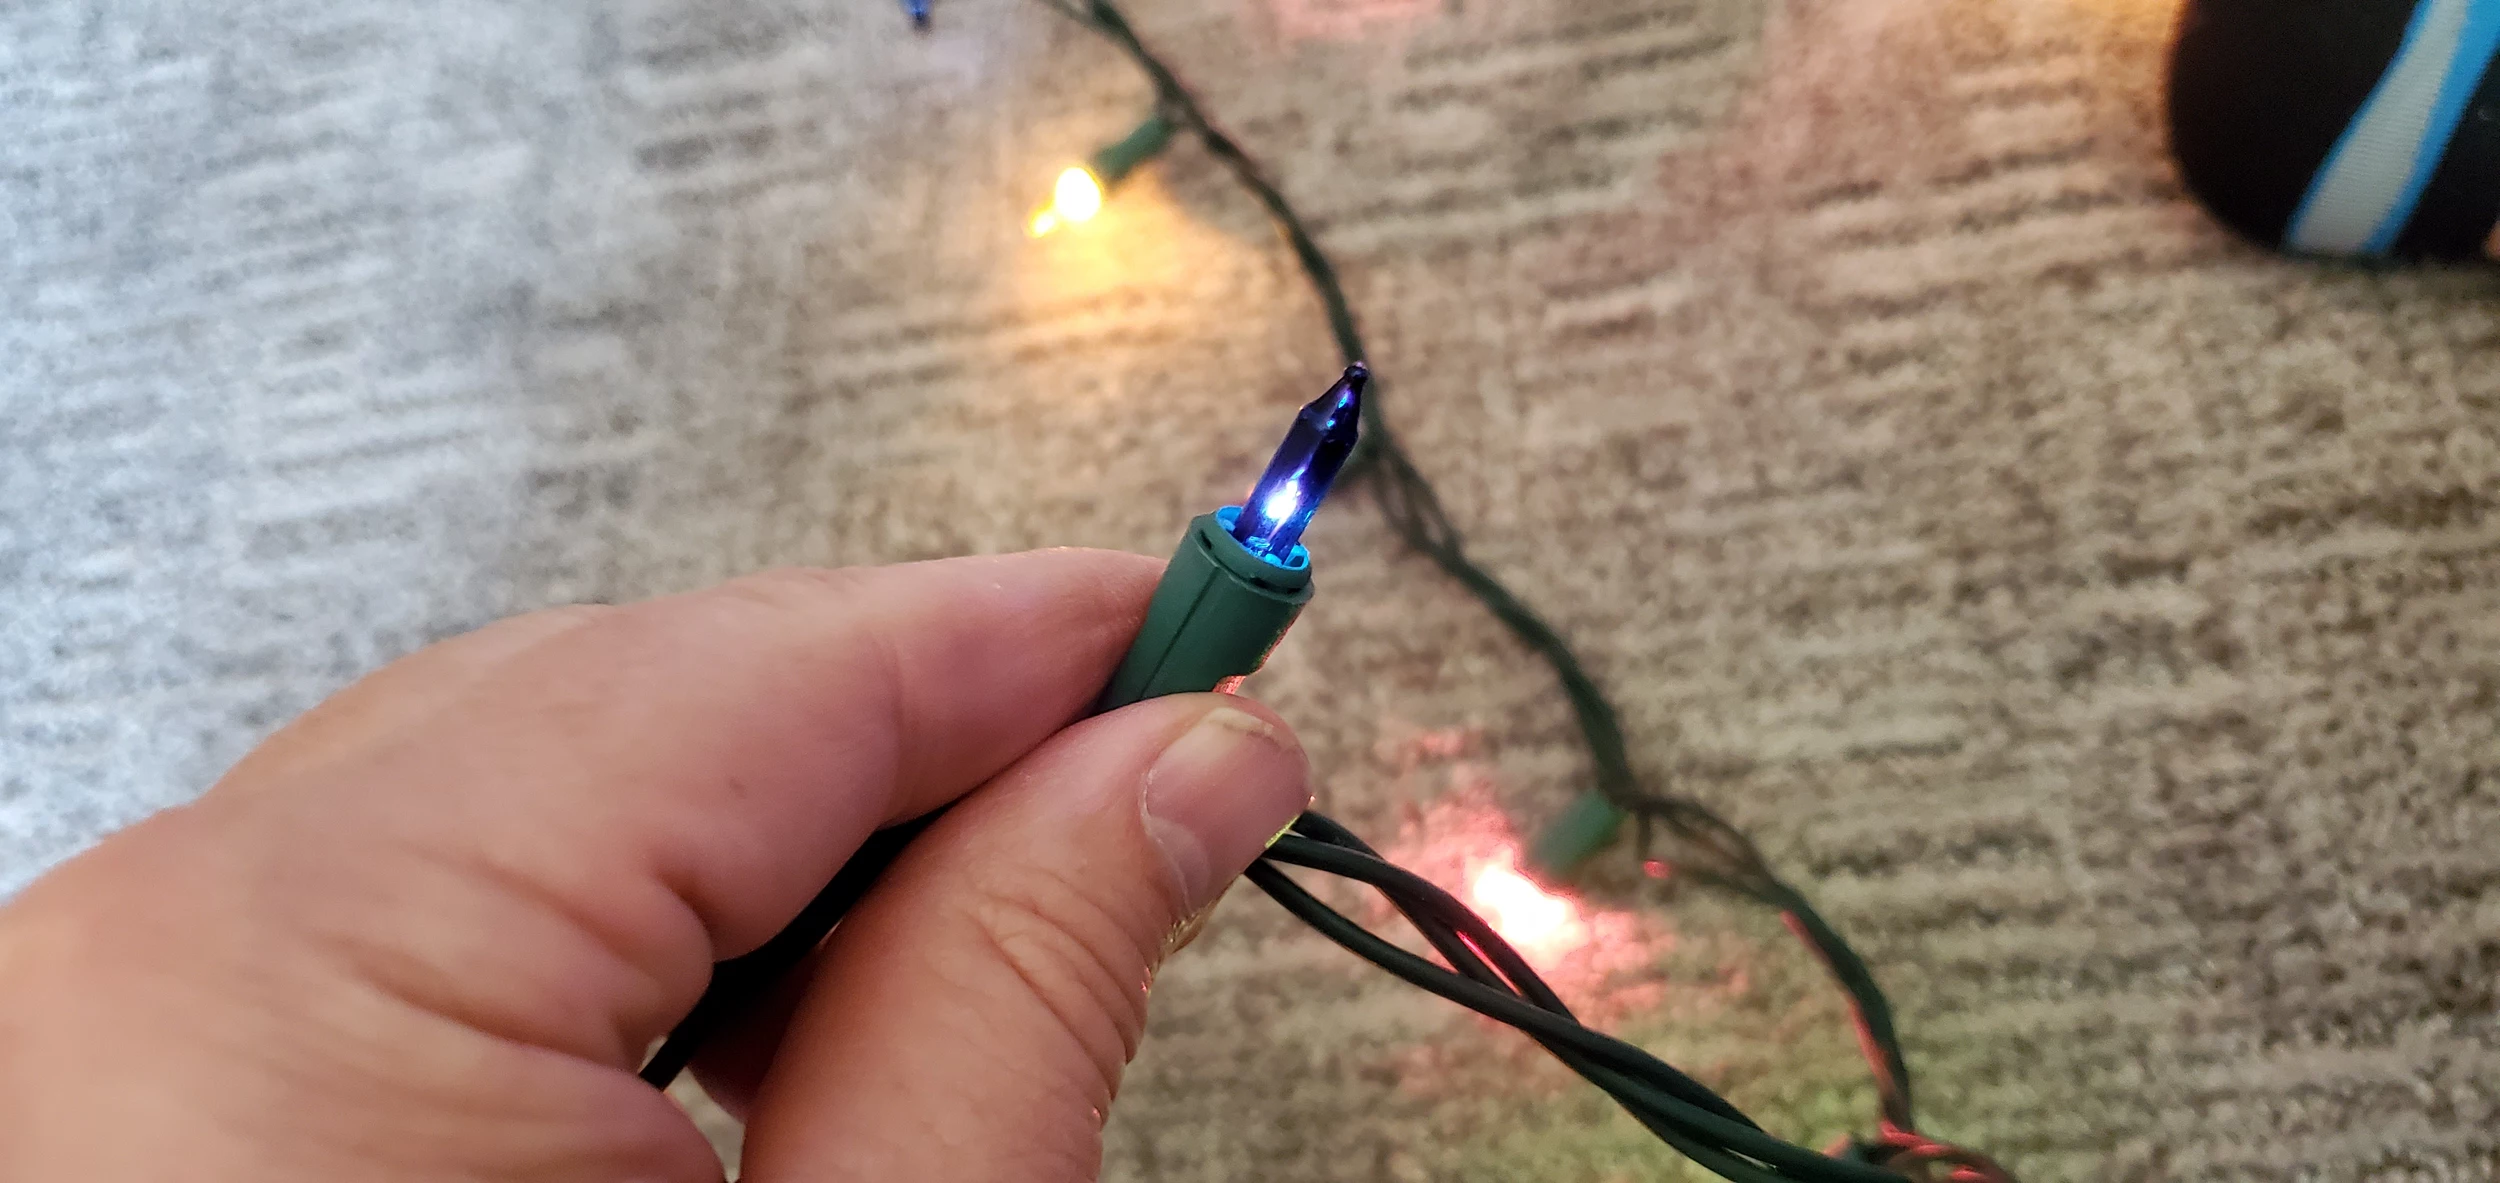 Christmas Light Troubleshooting & Technical Information